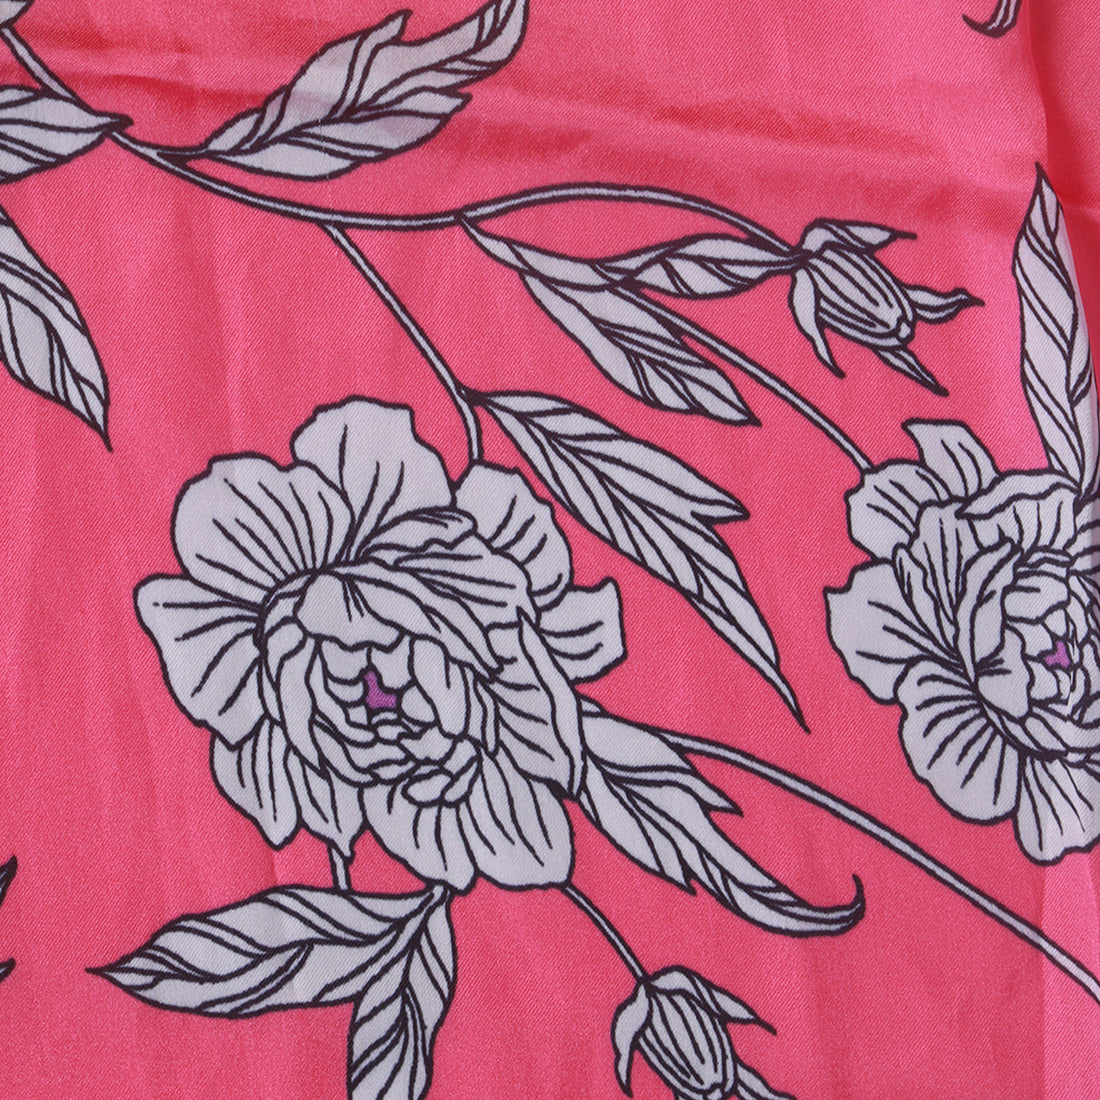 Pink & Red Floral Satin Scarf